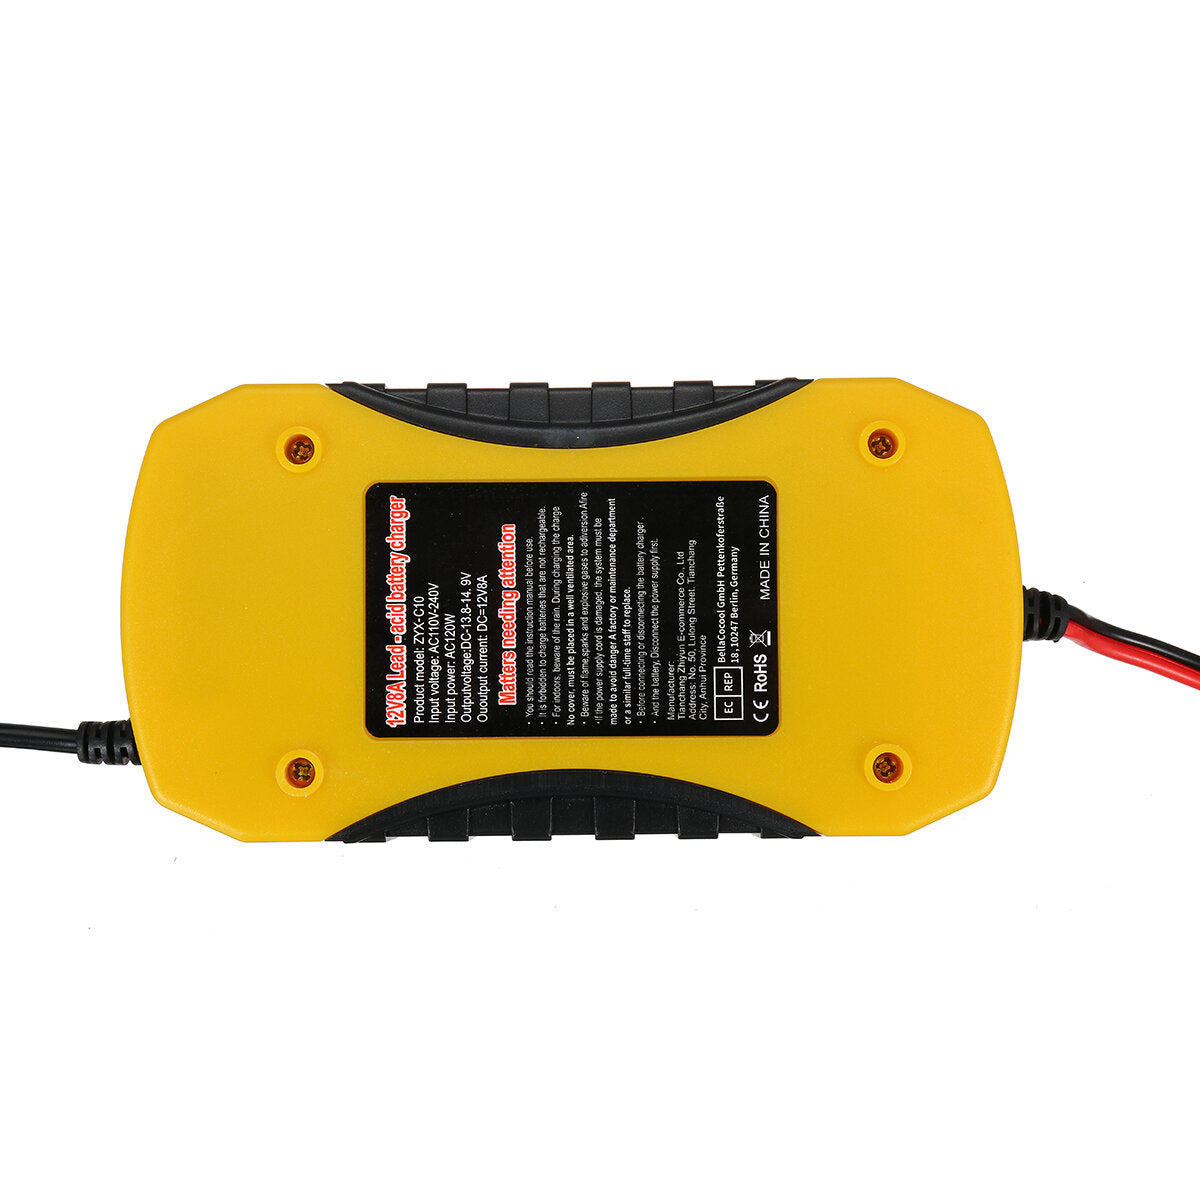 12 v 8a lcd pulsreparatie acculader voor auto motor agm gel nat loodzuur